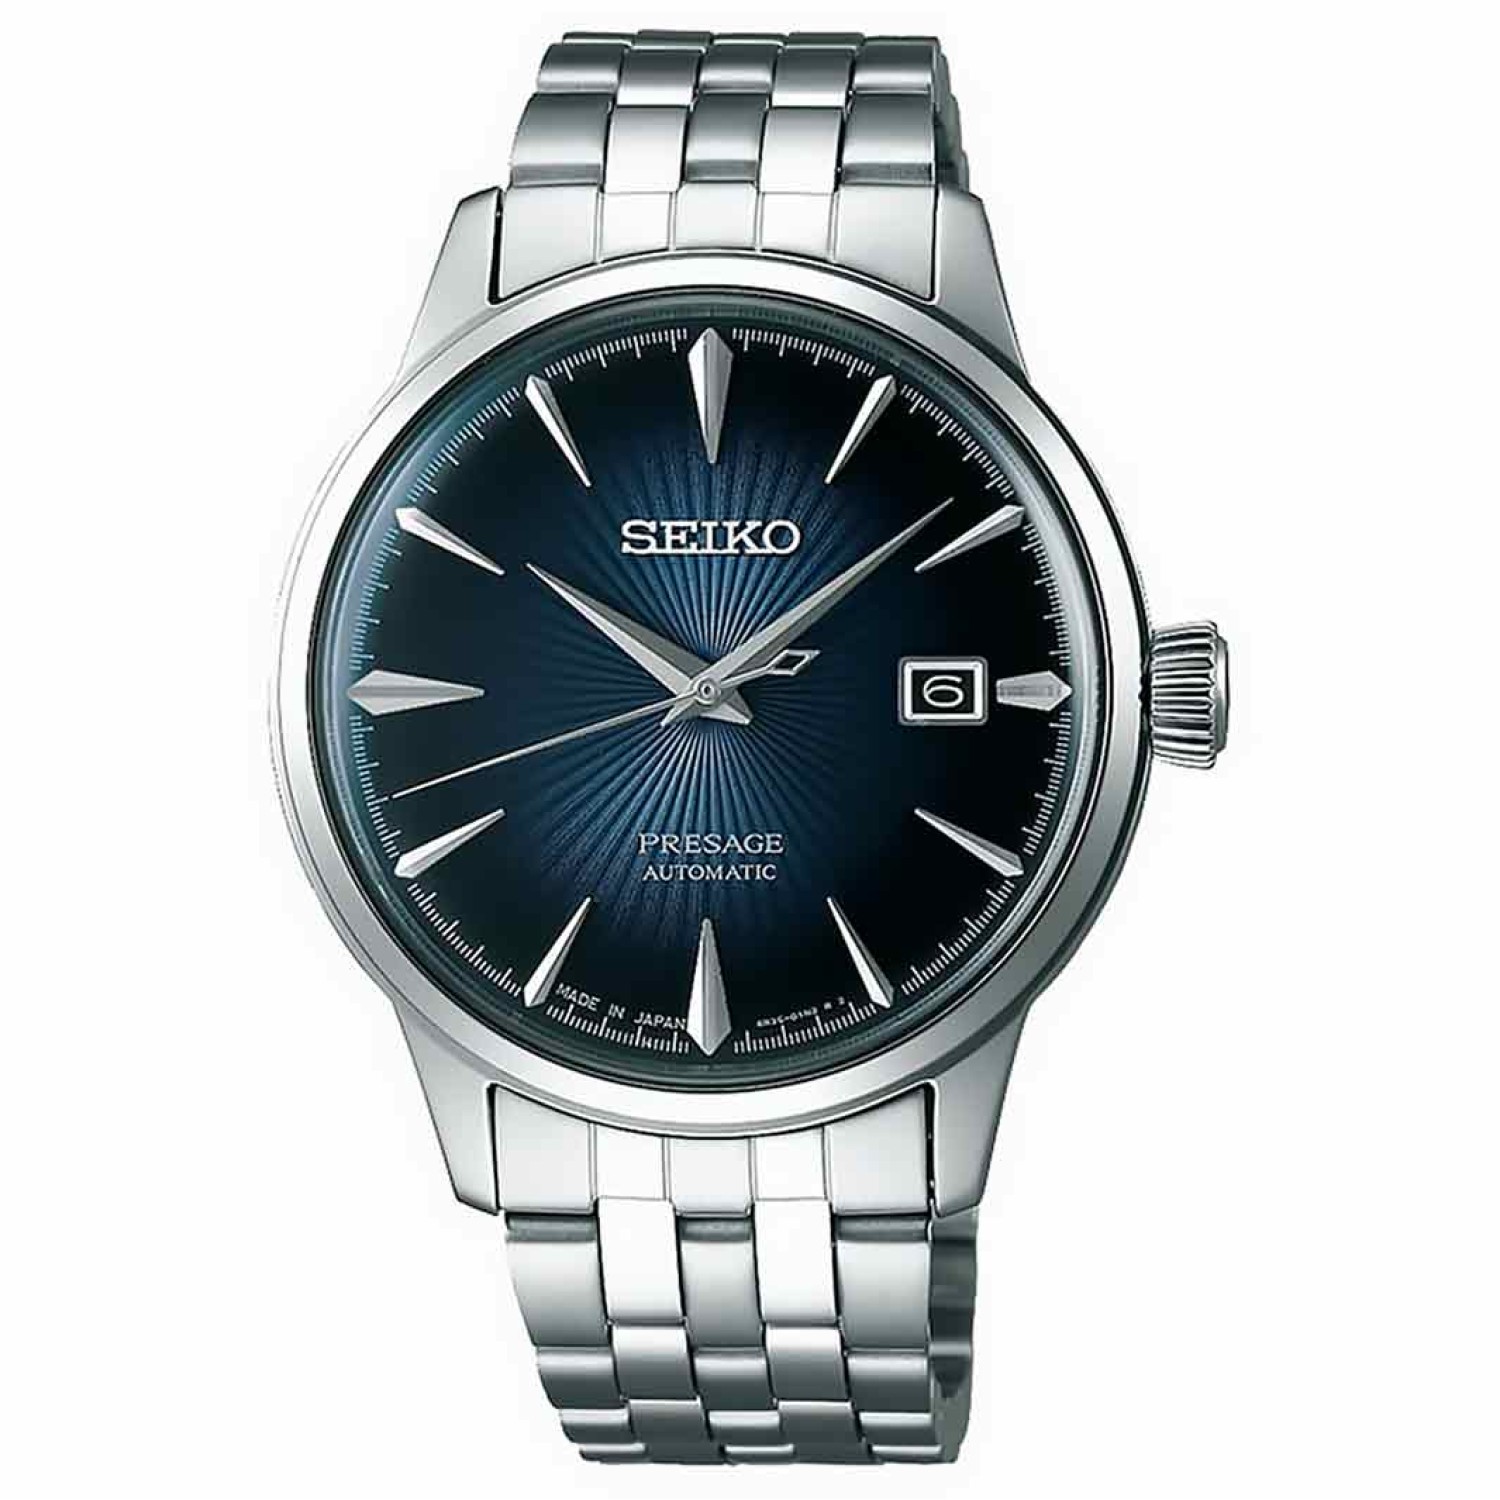 SRPB41J SEIKO Mens Presage Automatic Watch. This Seiko Presage Automatic SRPB41J mens watch is powered by the movement of the wearer - never change a battery   3 Months No Payments and Interest for Q Card holders LAYBUY - Pay it easy, in 6 @christies.onli